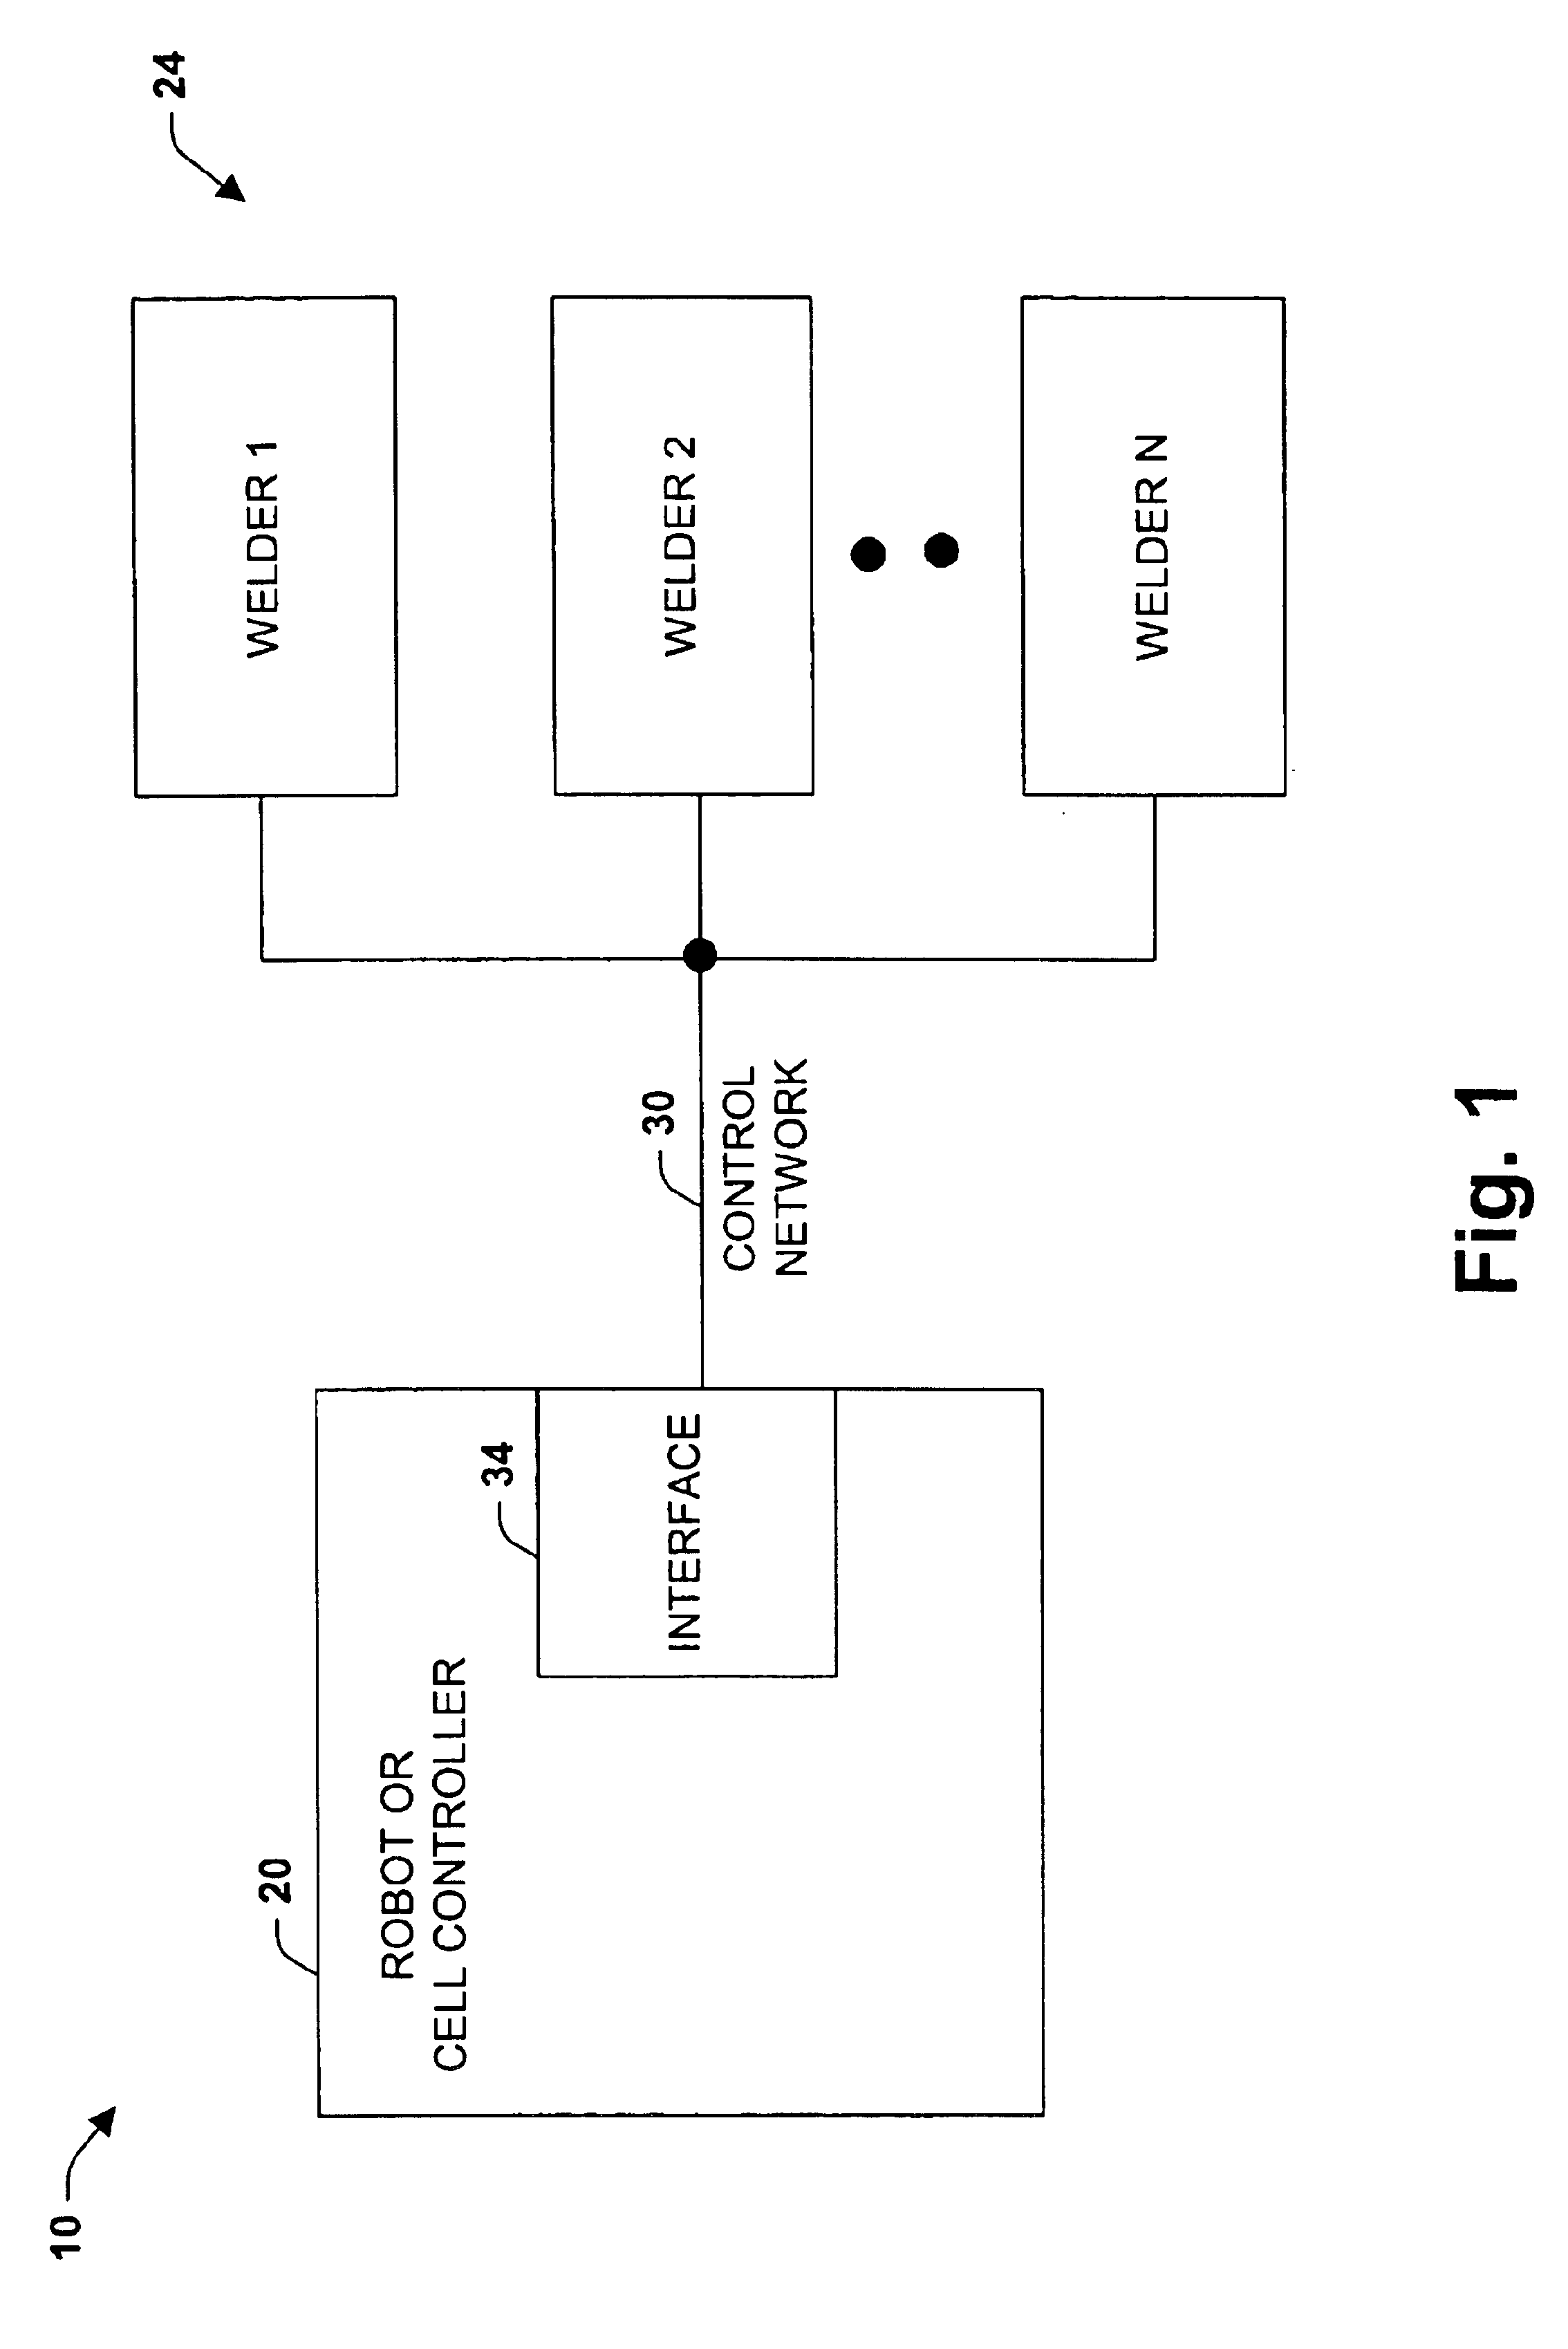 Welding system and methodology providing multiplexed cell control interface